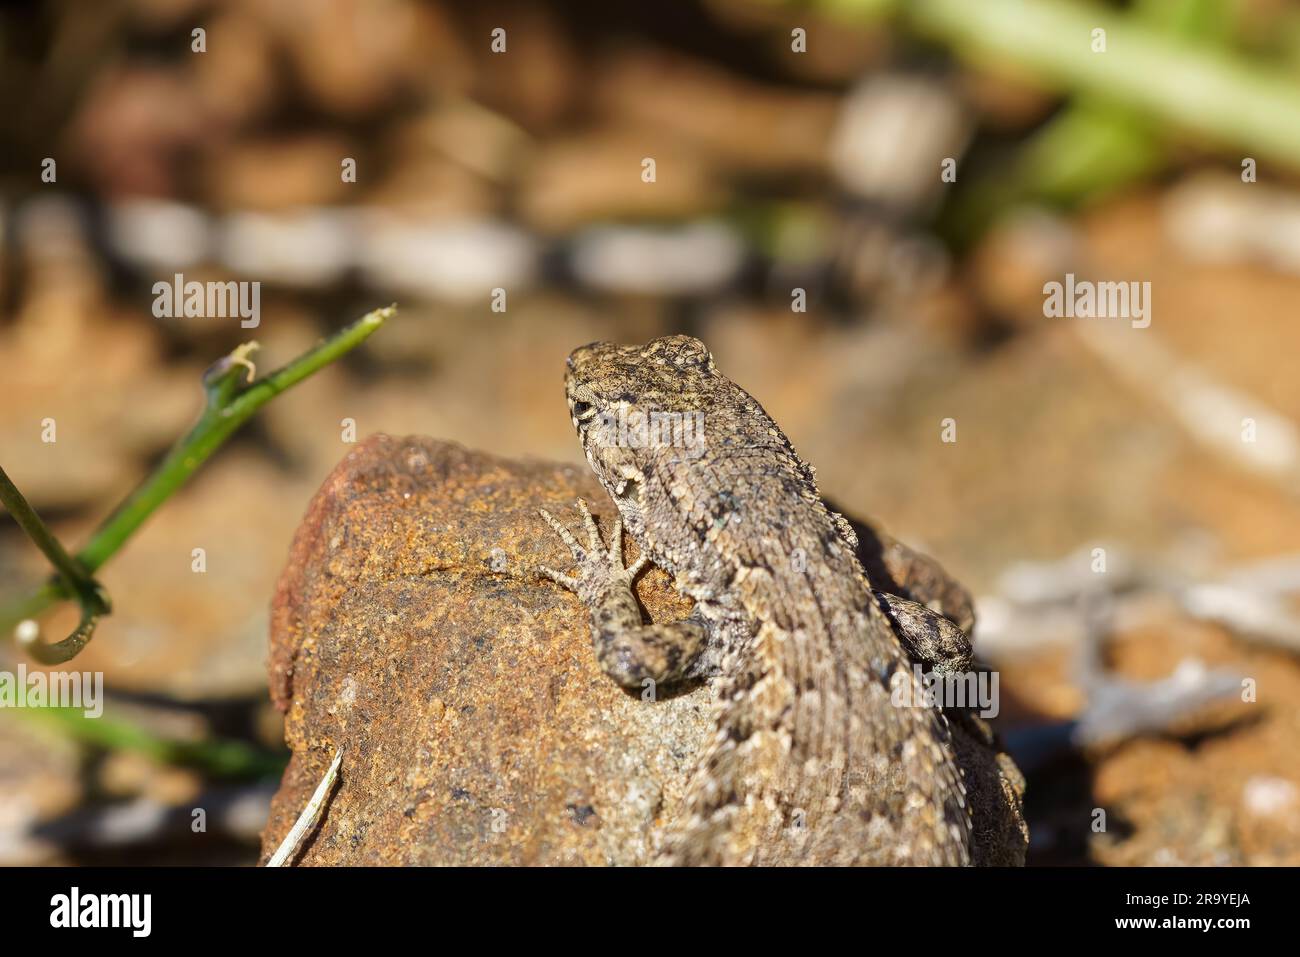 A close-up shot of a quick lizard perched on a rock in a sandy desert environment Stock Photo